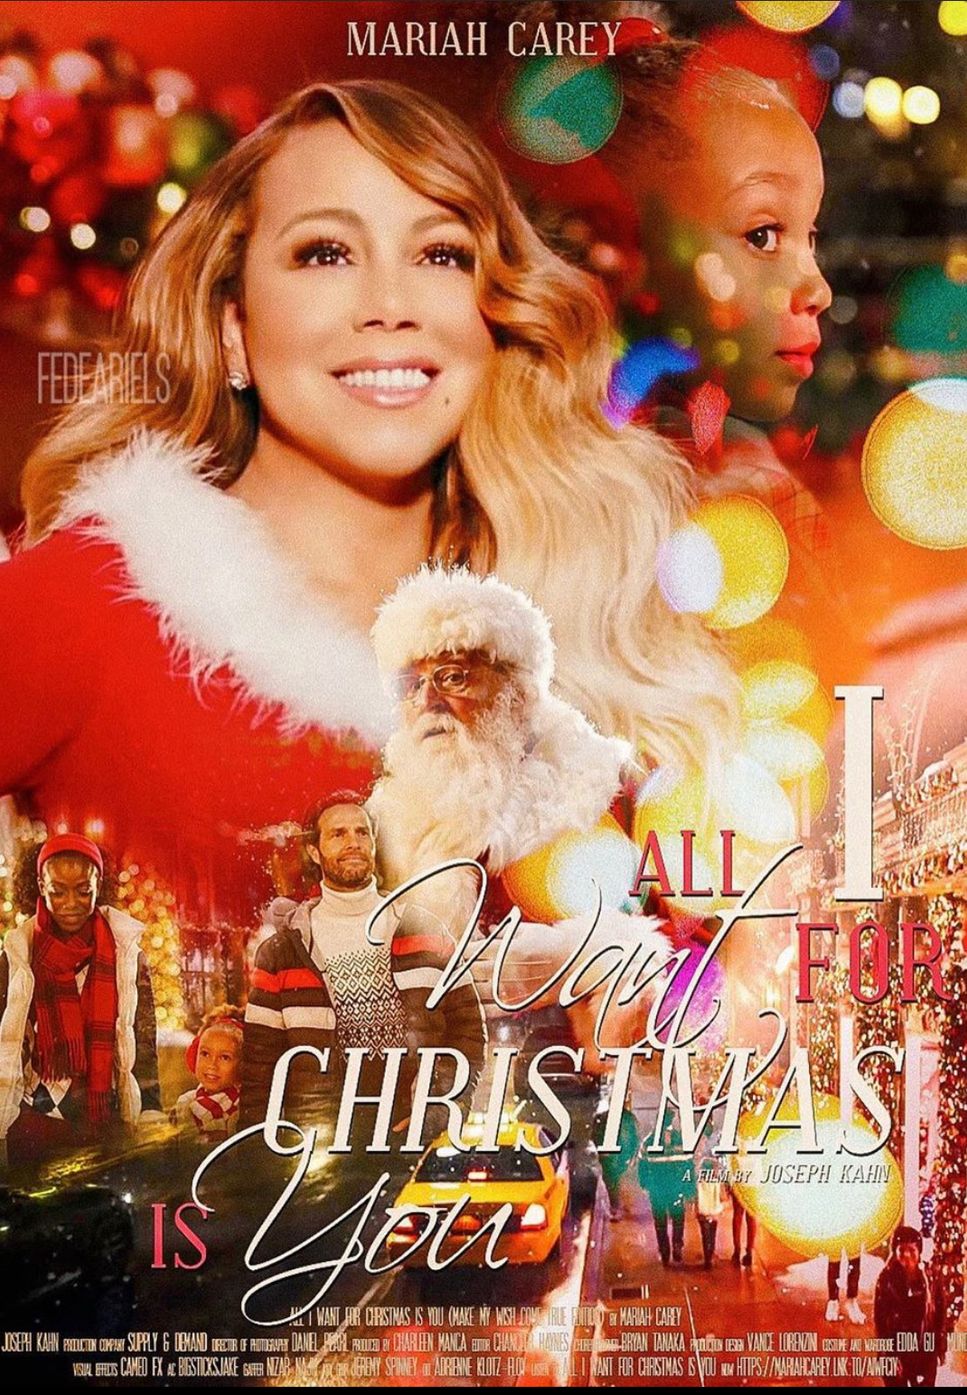 Mariah Carey - All I Want for Christmas Is You (Easy Version) by ChansMusic